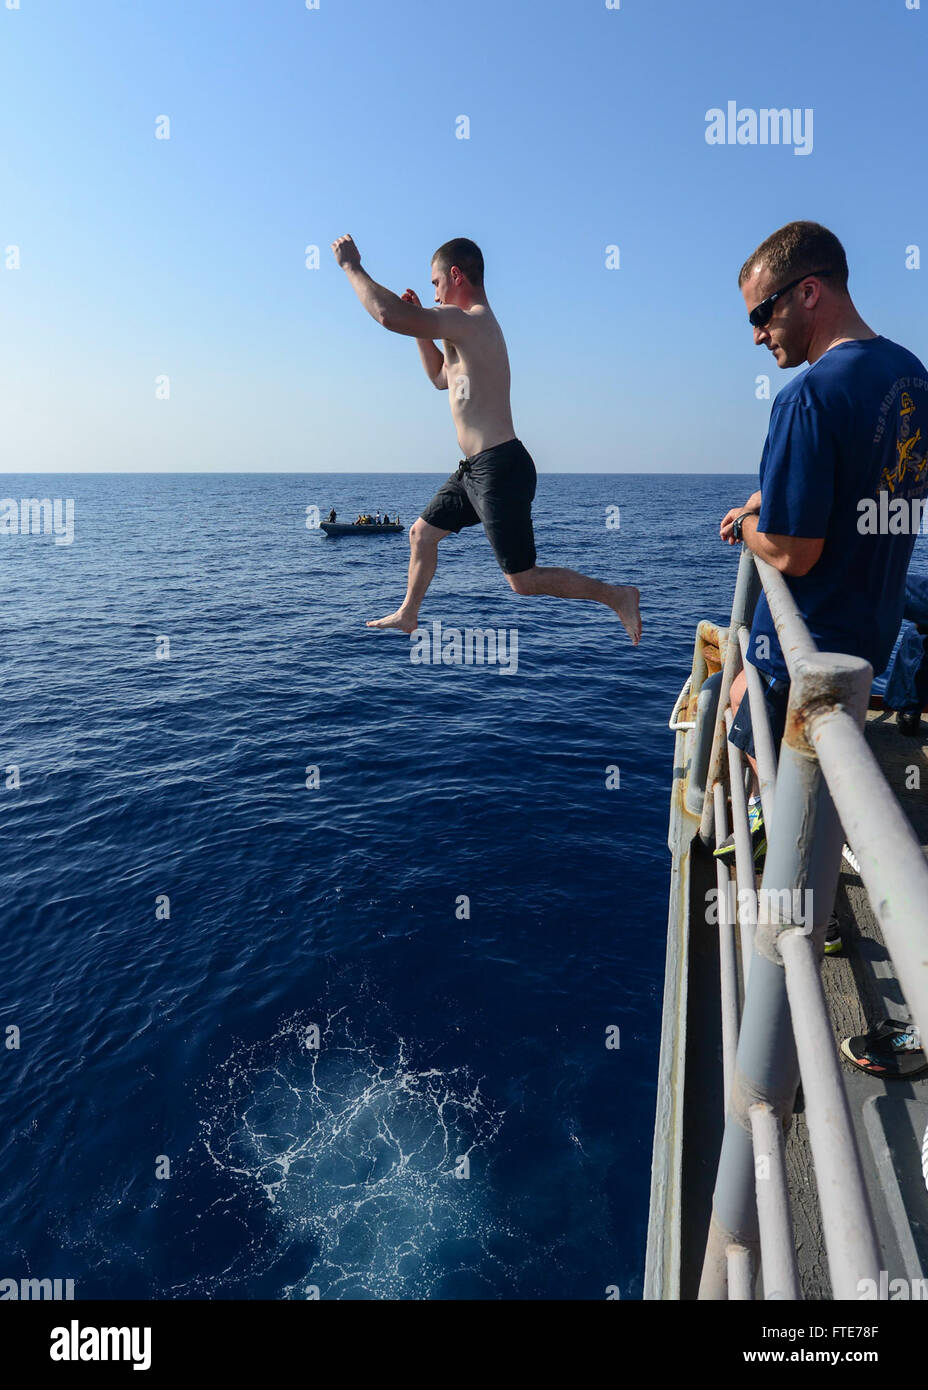 MEDITERRANEAN SEA (Nov. 3, 2013) - Operations Specialist 3rd Class Brian Caddell jumps from the fantail while Senior Chief Hospital Corpsman Andrea Zoto observes during a swim call aboard the guided missile cruiser USS Monterey (CG 61). Monterey is deployed in support of maritime security operations and theater security cooperation efforts in the U.S. 6th Fleet area of operations. (U.S. Navy photo by Mass Communication Specialist 3rd Class Billy Ho/Released) Stock Photo